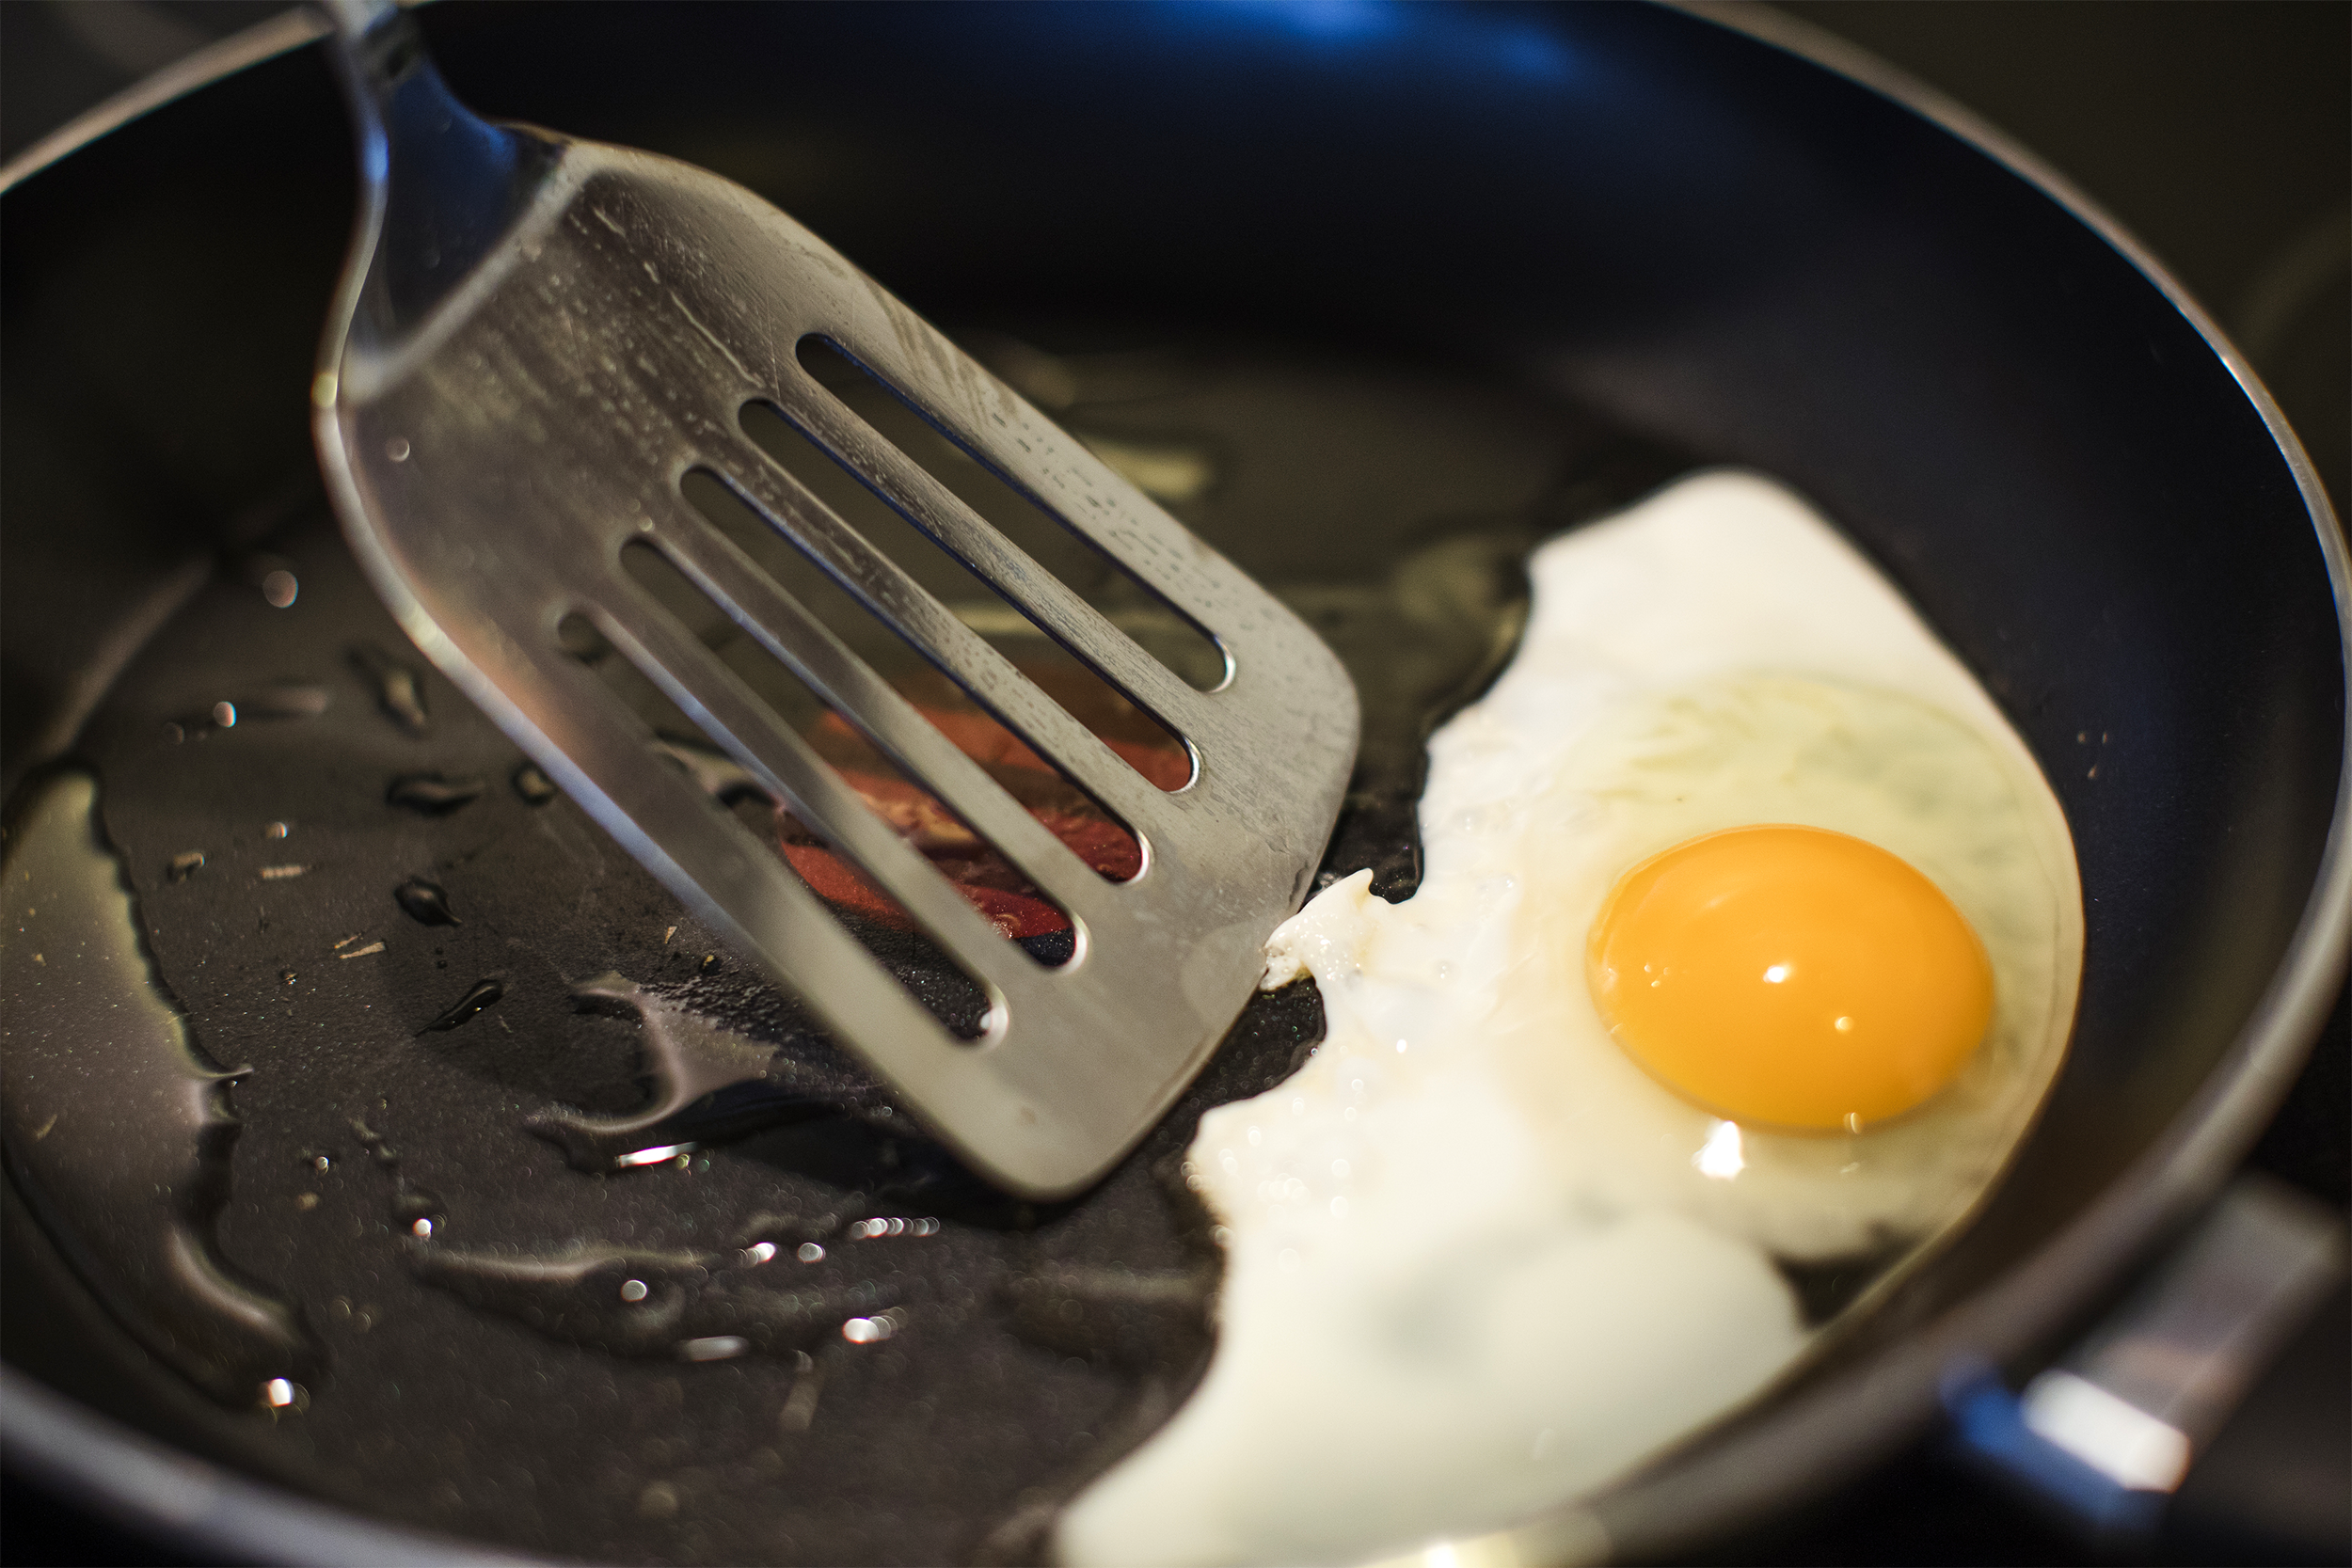 <p>For novice cooks, the hardest part of frying an egg is probably flipping it without breaking the yolk. Start by melting 1 tablespoon of butter or cooking oil in a <a href="https://blog.cheapism.com/best-kitchen-tools-15679/">nonstick frying pan</a> over medium-high heat. If using cooking spray instead, heat the pan until a drop of water sizzles instantly and evaporates on contact, then spray. Break the egg, pour it carefully into the pan so the white and the yellow don't intermix, and immediately turn the heat to medium-low. Once the white has set completely, flip it over carefully. Cook for another 1 to 3 minutes, until the yolk reaches the desired firmness and is less runny. Serve fried eggs immediately with toast to mop up any leftover yolk. Fried eggs are also popular as a sandwich ingredient or a topping for other breakfast items, such as <a href="https://blog.cheapism.com/ideas-for-rosh-hashanah-dinner-leftovers-14506/">corned beef hash</a>, or even pasta for dinner.</p>